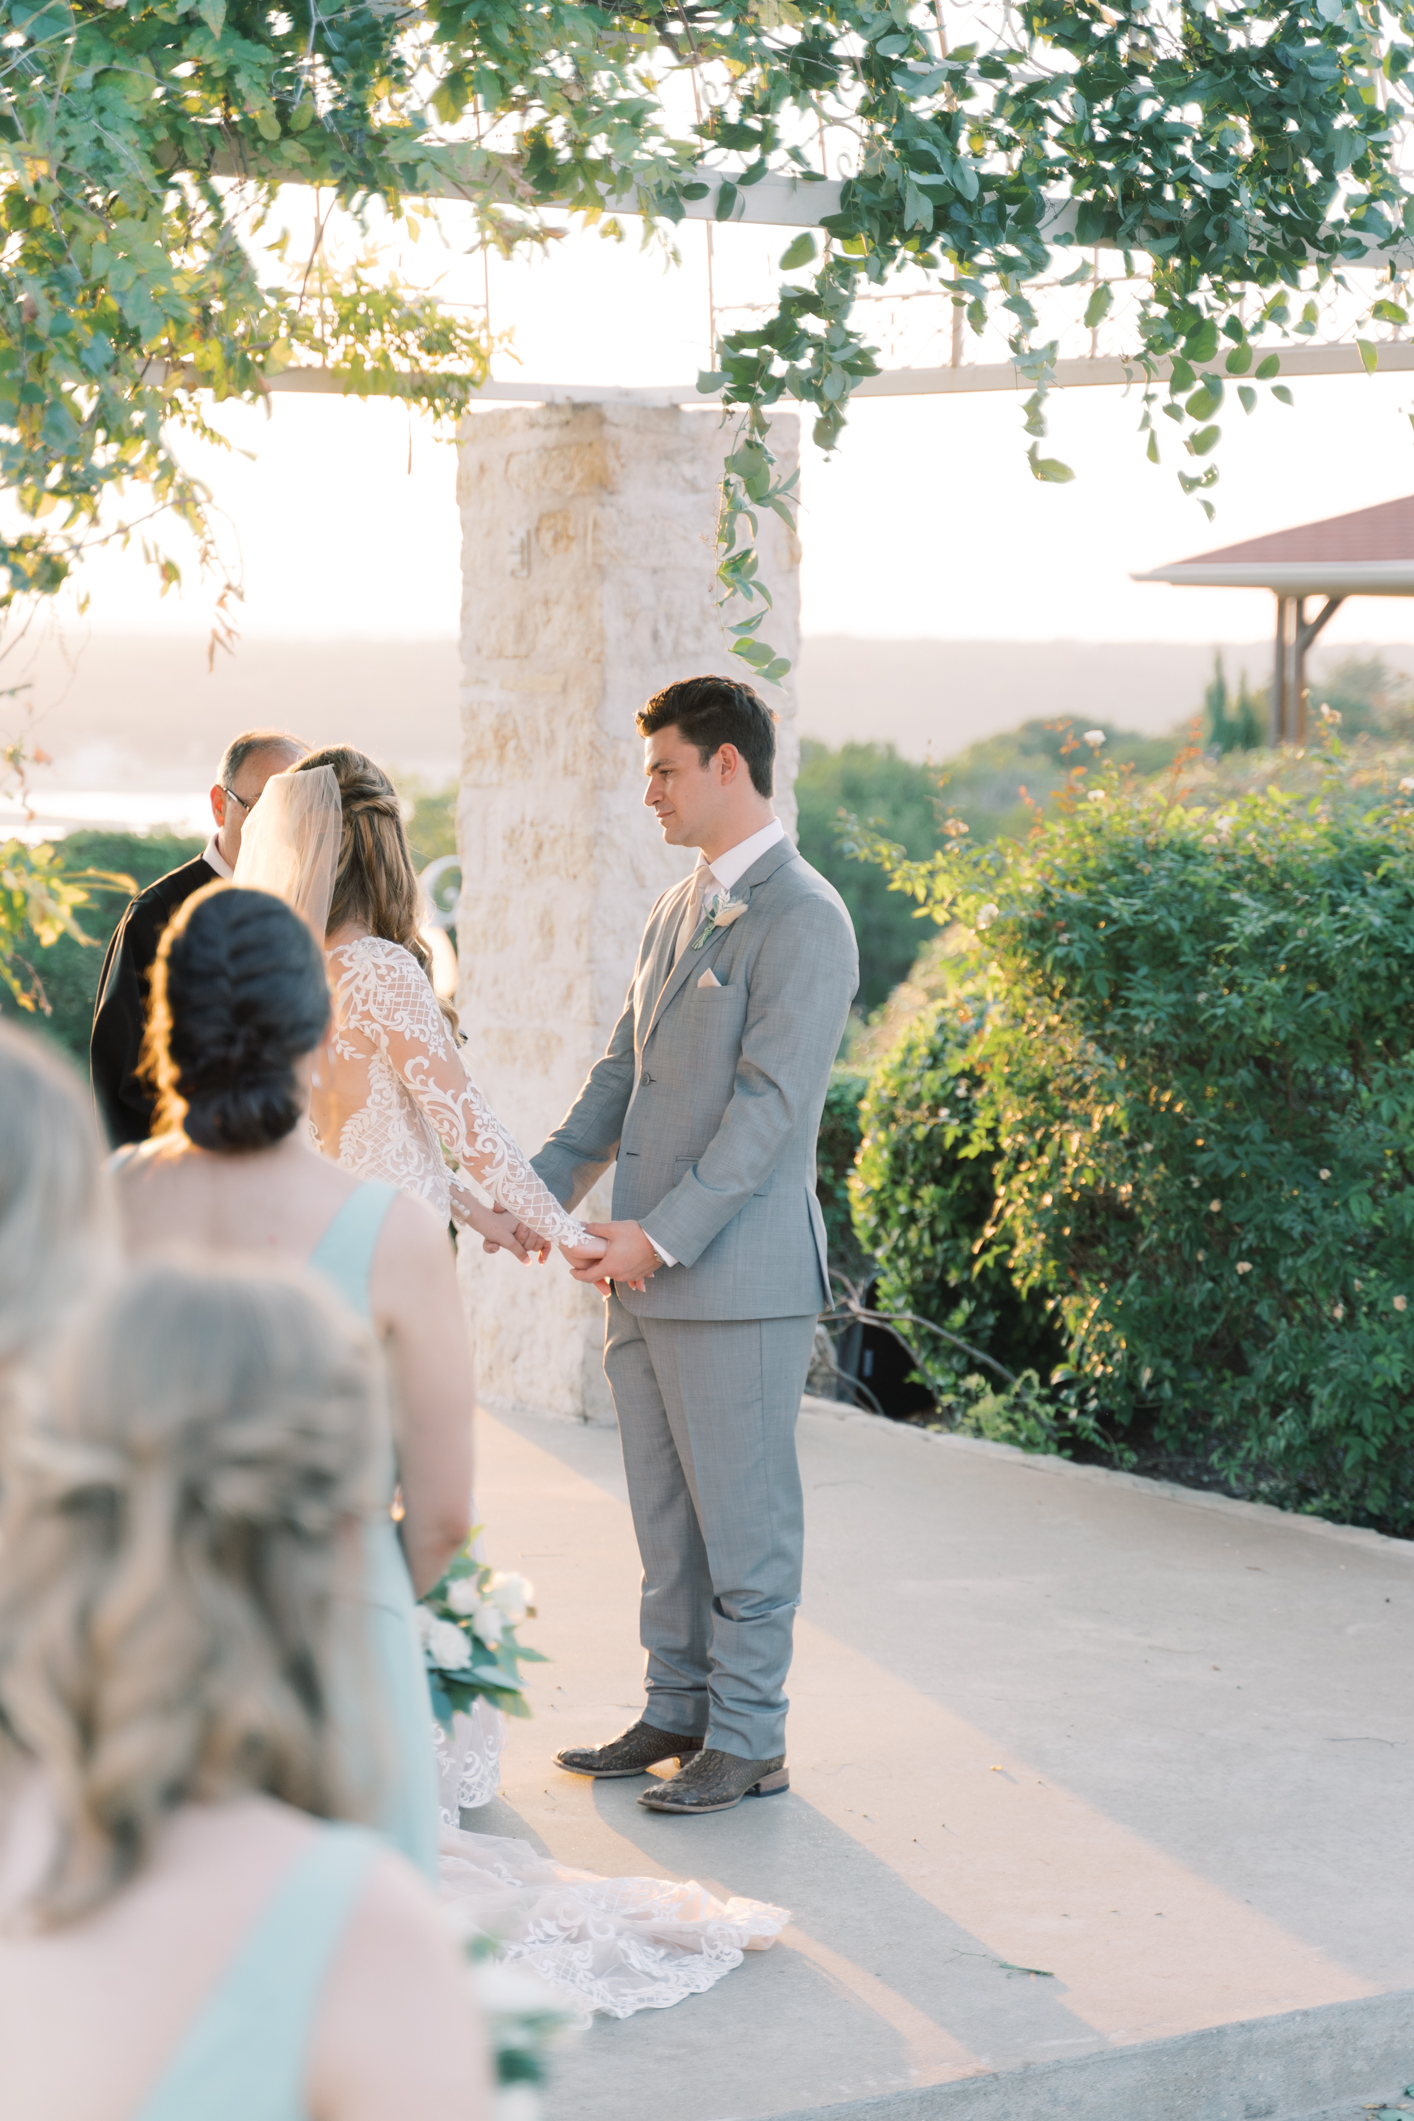 Jac's boho sheer, form fitting lace dress with gorgeous long sleeves is to die for! Their wedding day at Vintage Villas in Lakeway TX (near Austin) has the most beautiful sunset overlooking the water. You have to see for yourself! 